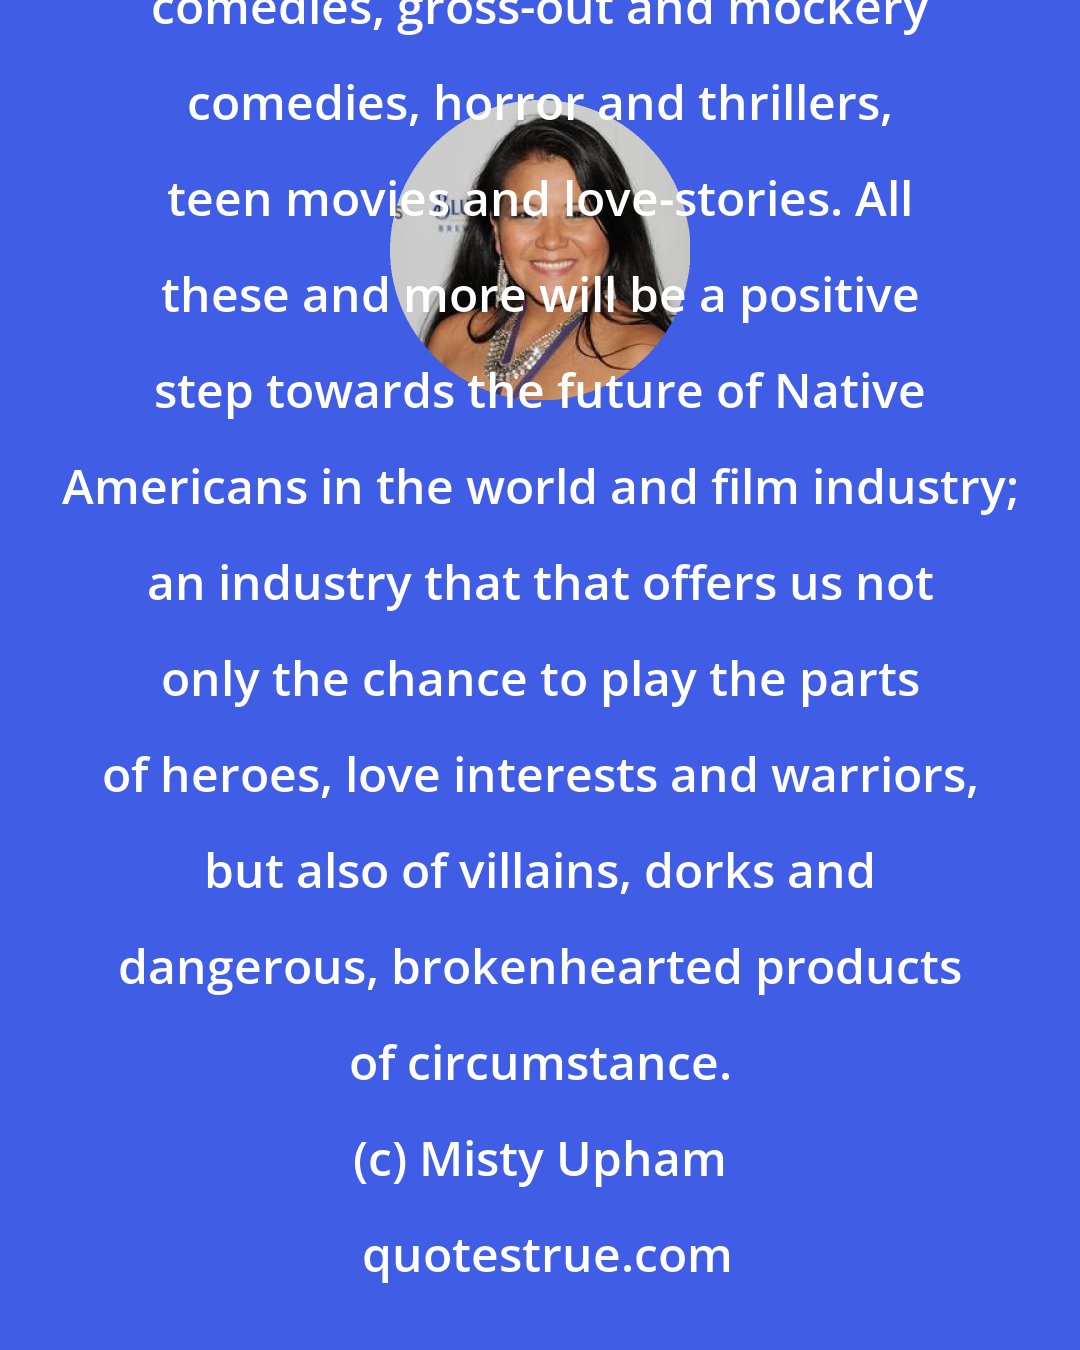 Misty Upham: In a business that has exploited and ignored our people I have only found dead-ends. We need romantic comedies, gross-out and mockery comedies, horror and thrillers, teen movies and love-stories. All these and more will be a positive step towards the future of Native Americans in the world and film industry; an industry that that offers us not only the chance to play the parts of heroes, love interests and warriors, but also of villains, dorks and dangerous, brokenhearted products of circumstance.